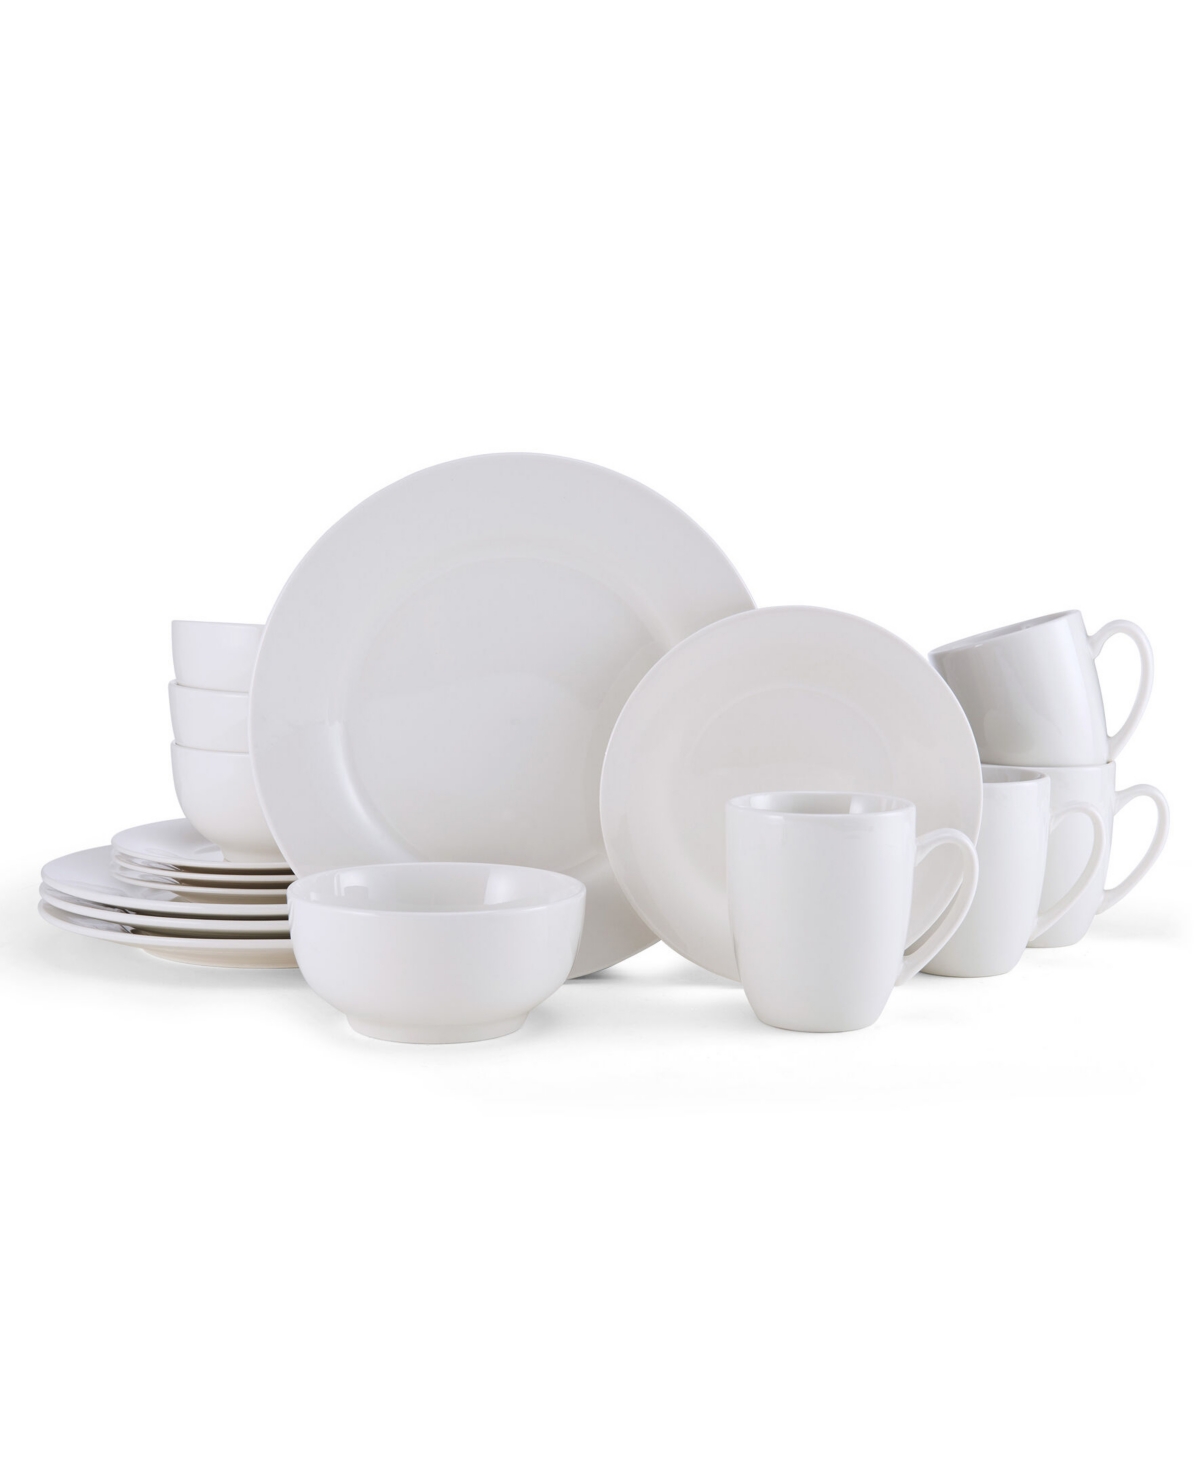 Kendall 16 Piece Dinnerware Set, Service for 4 - White